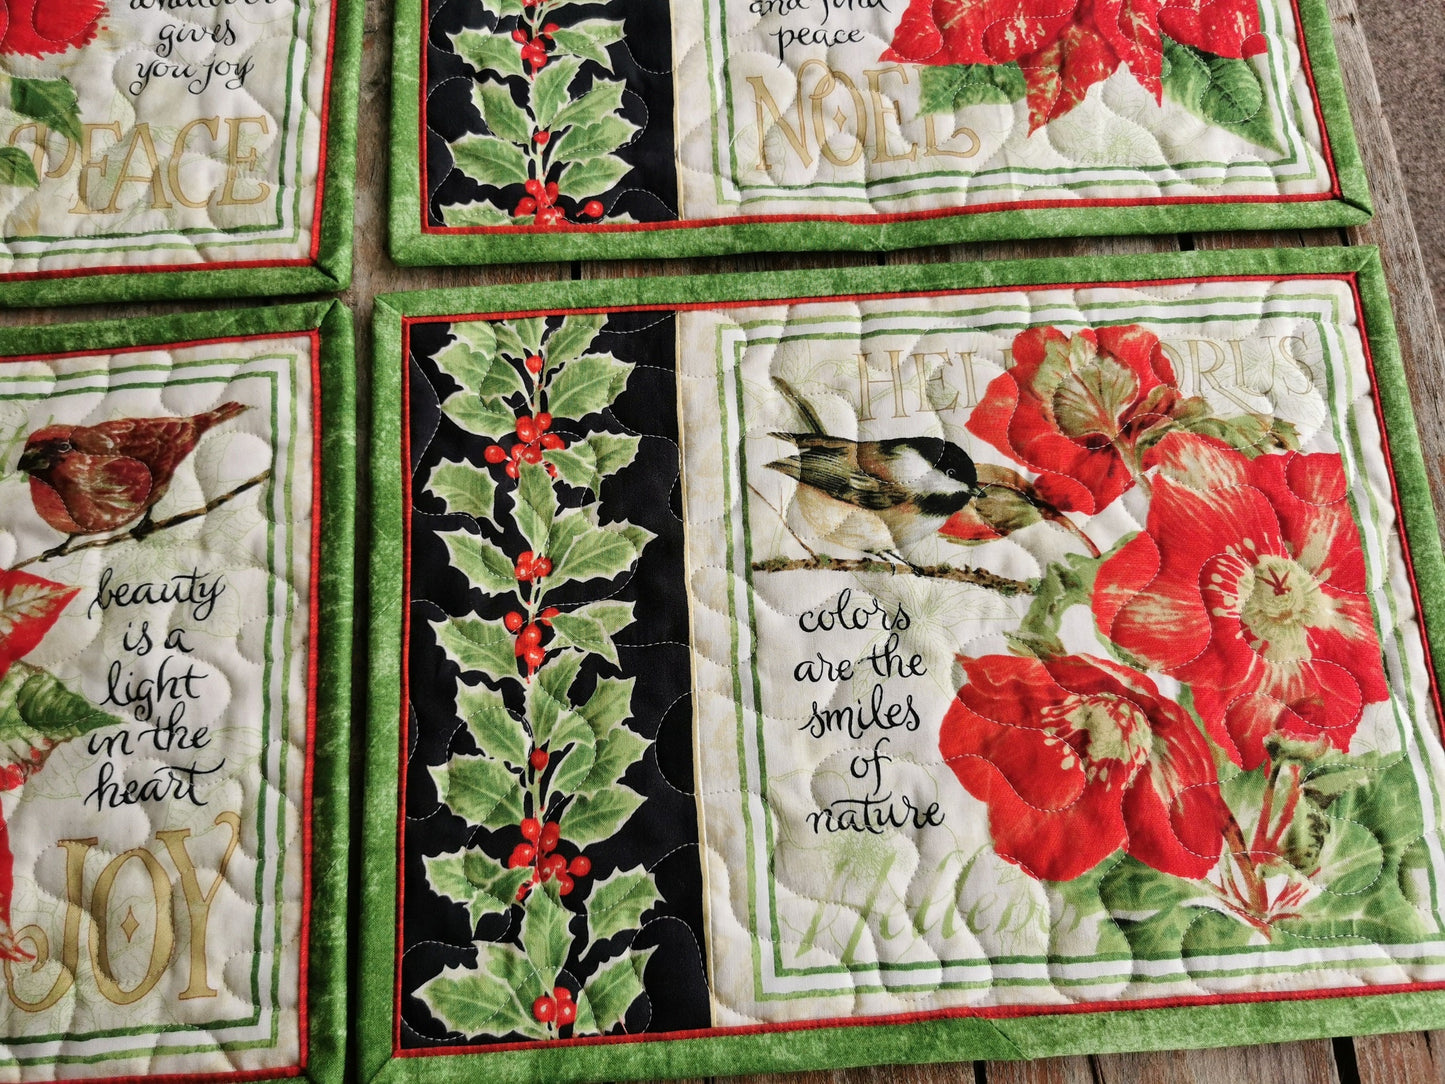 quilted placemats with inspirational message, holly & berries, Chickadee, Helleborus flower, 